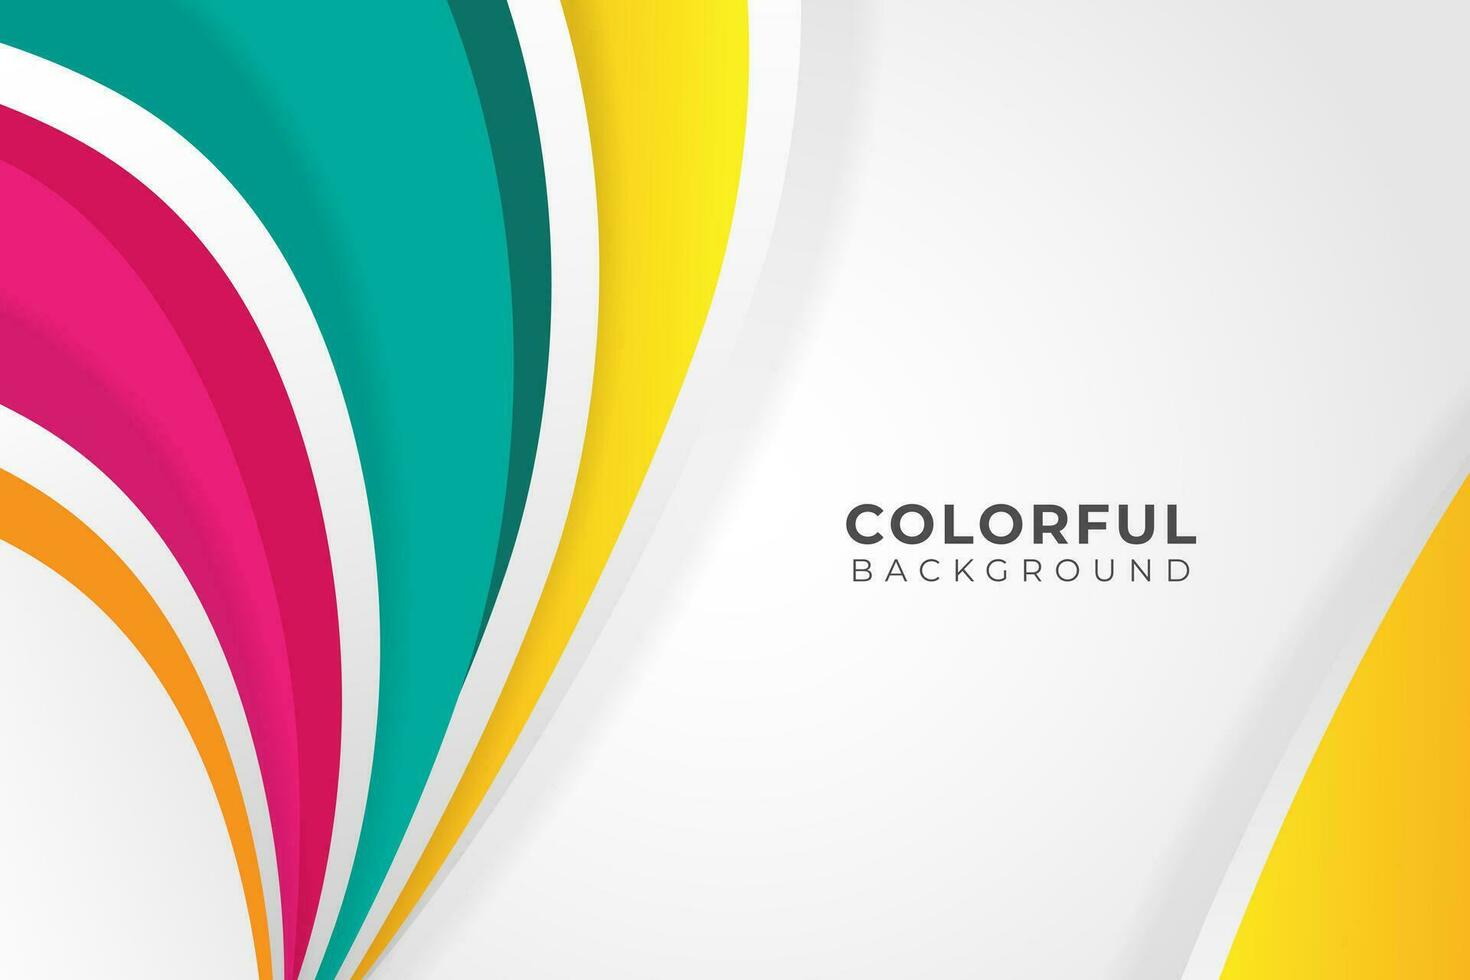 Colorful background with abstract shapes vector